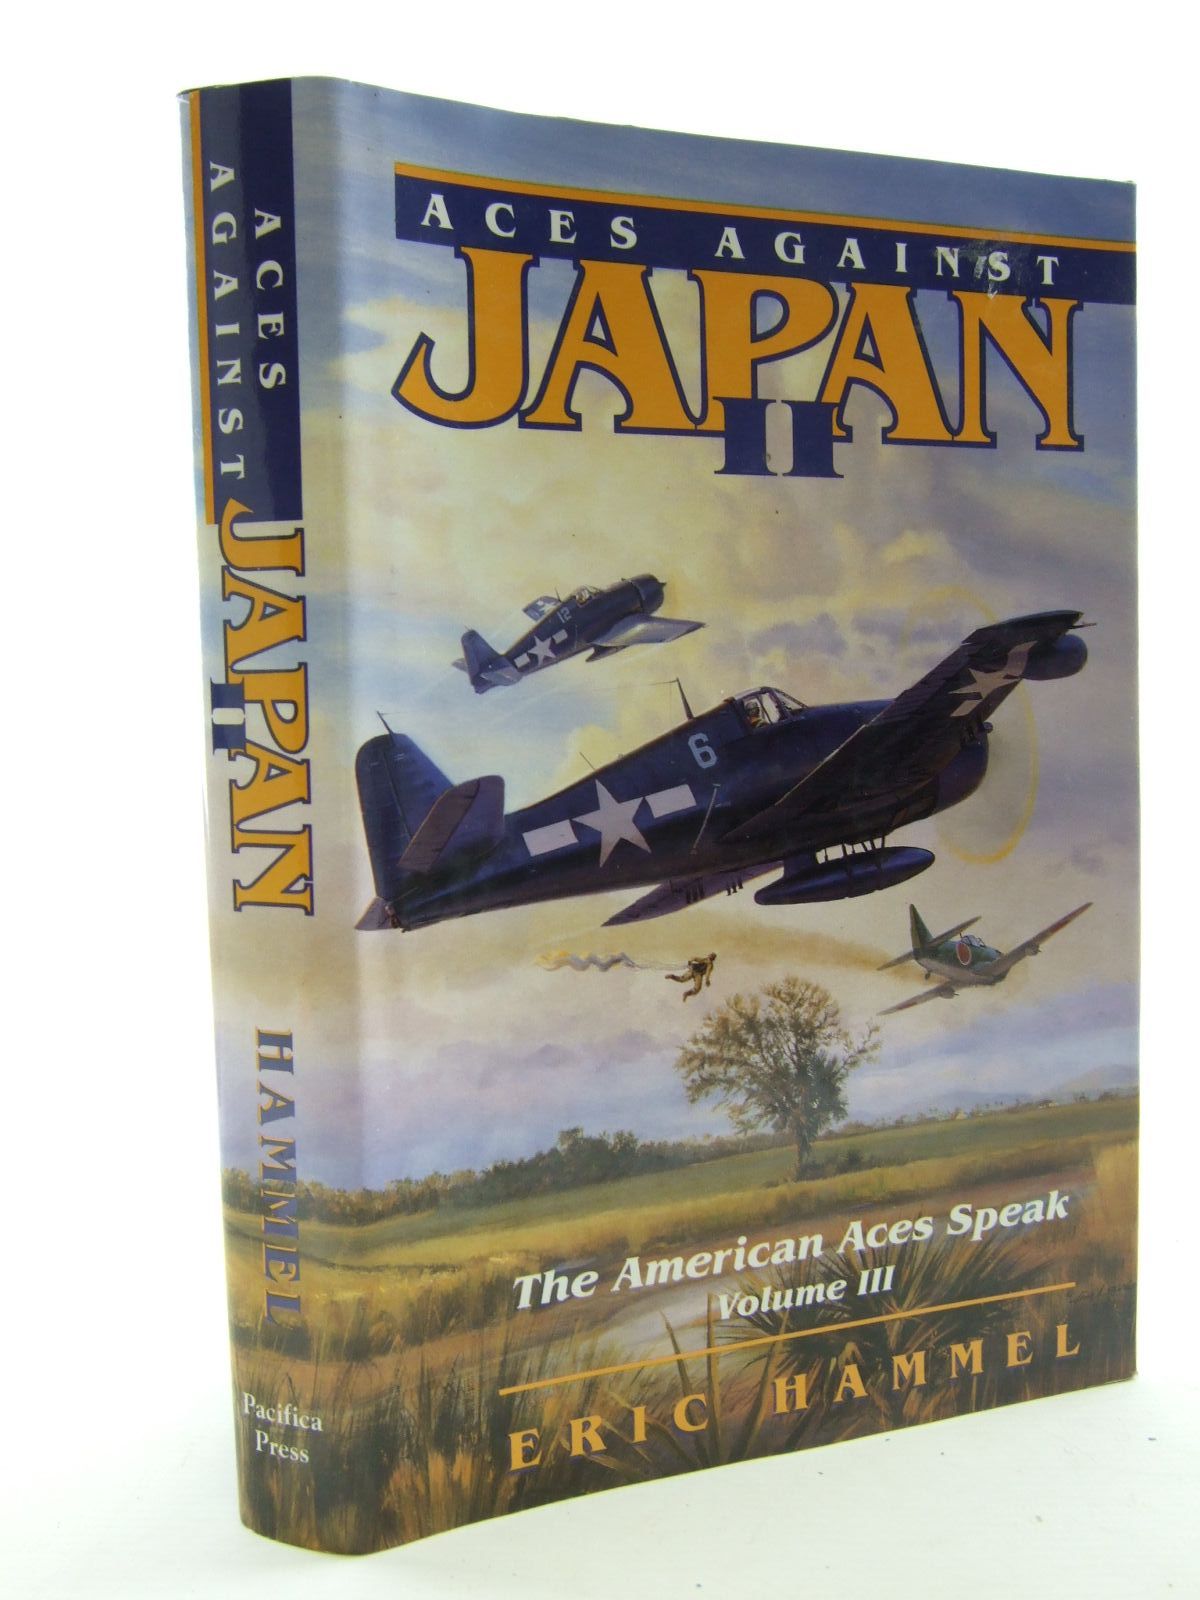 Photo of ACES AGAINST JAPAN II THE AMERICAN ACE SPEAKS VOLUME III written by Hammel, Eric published by Pacifica Press (STOCK CODE: 1706365)  for sale by Stella & Rose's Books